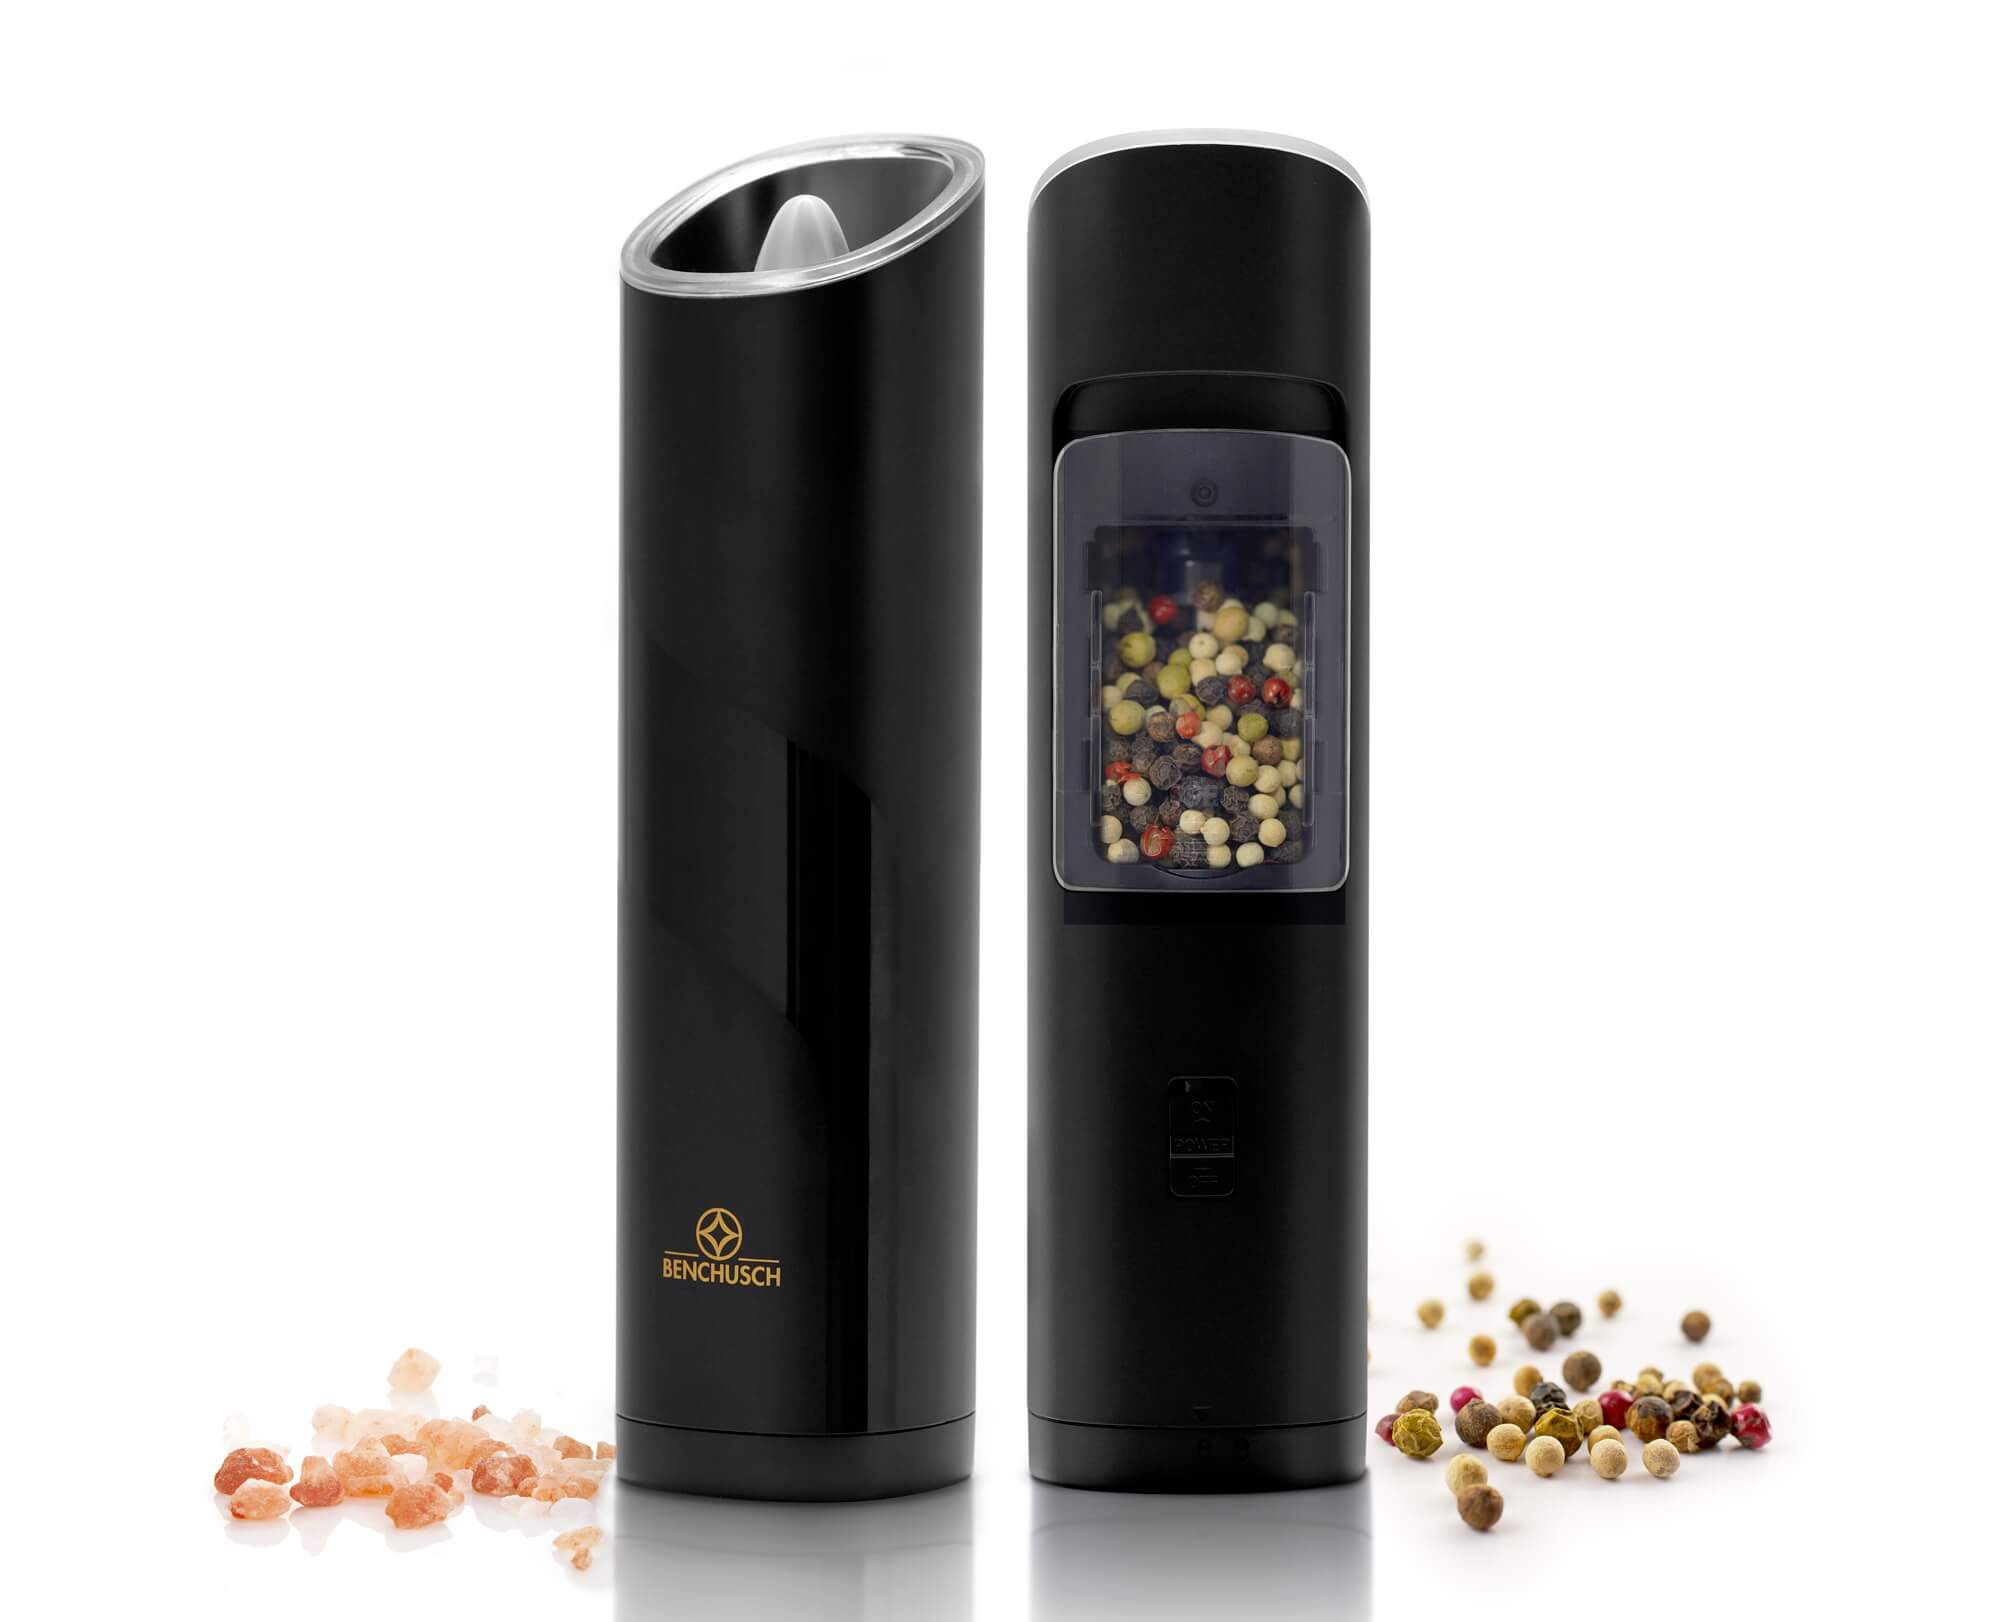 Benchusch Modern Electric Gravity Pepper Grinder with pepper on the white background